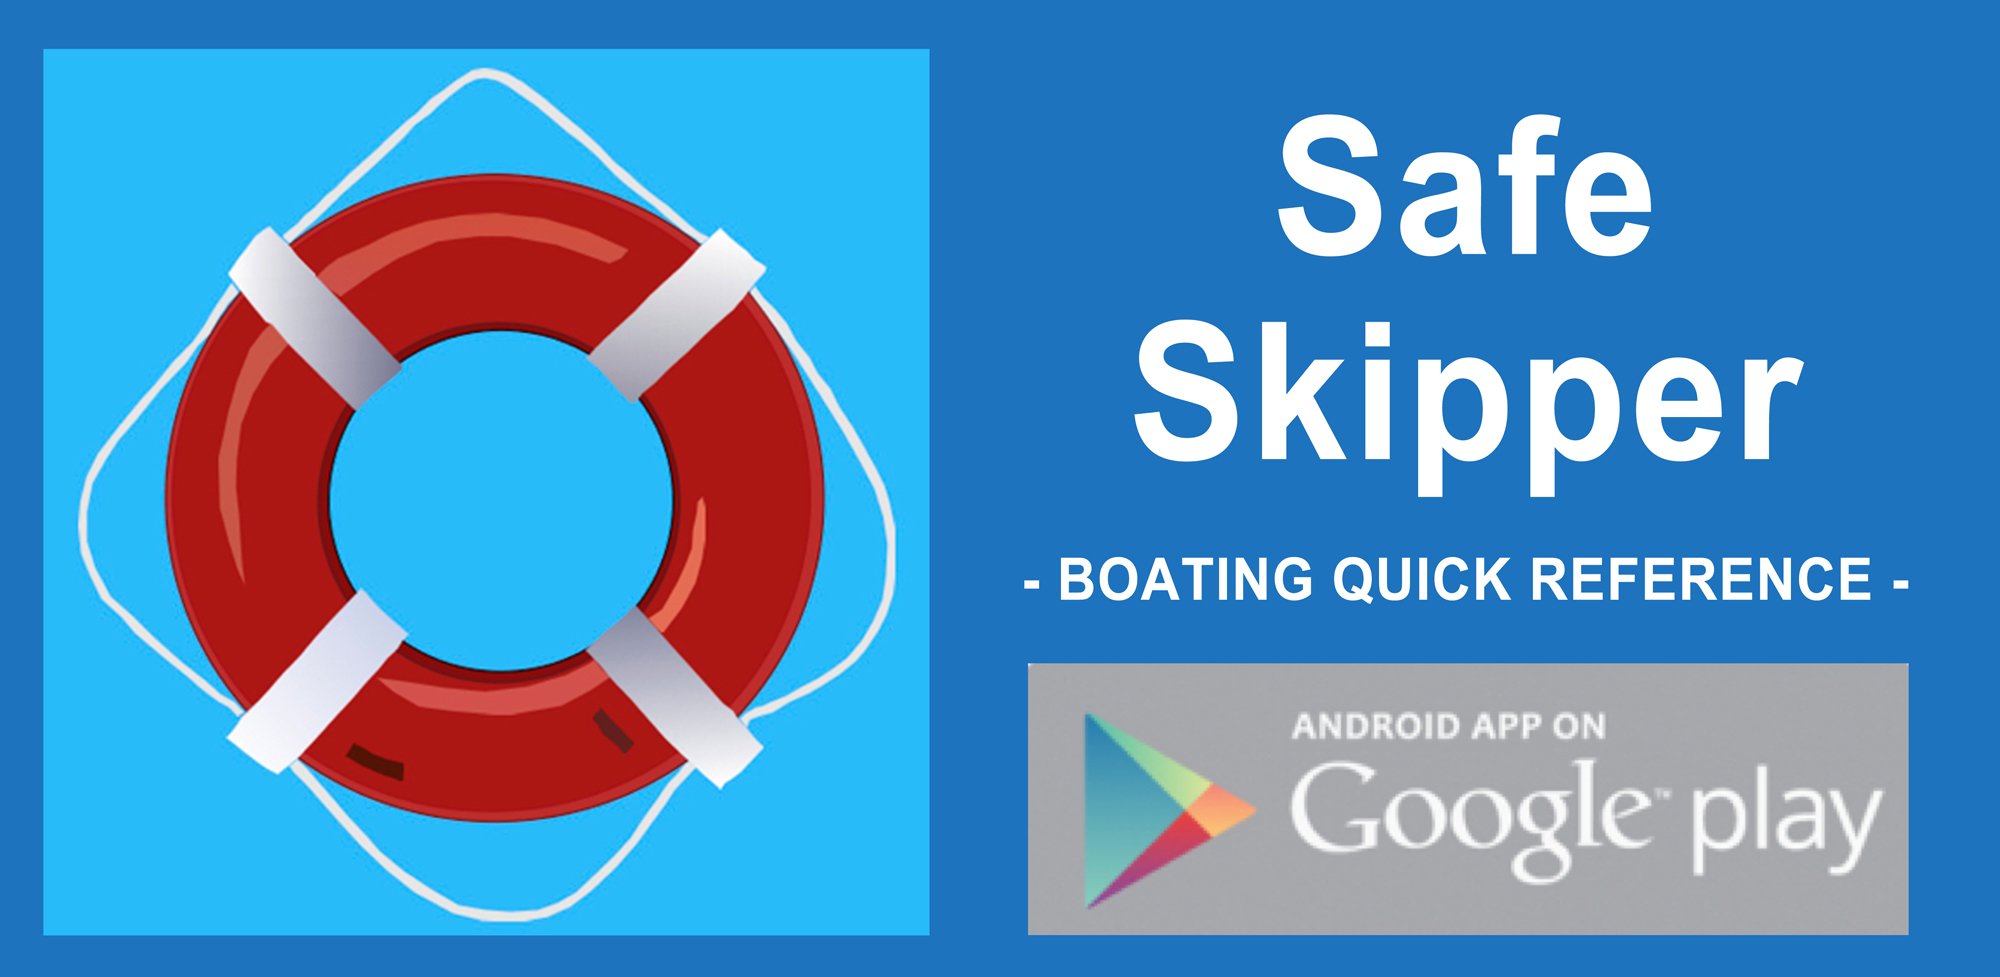 Best boating sea safety apps from Safe Skipper